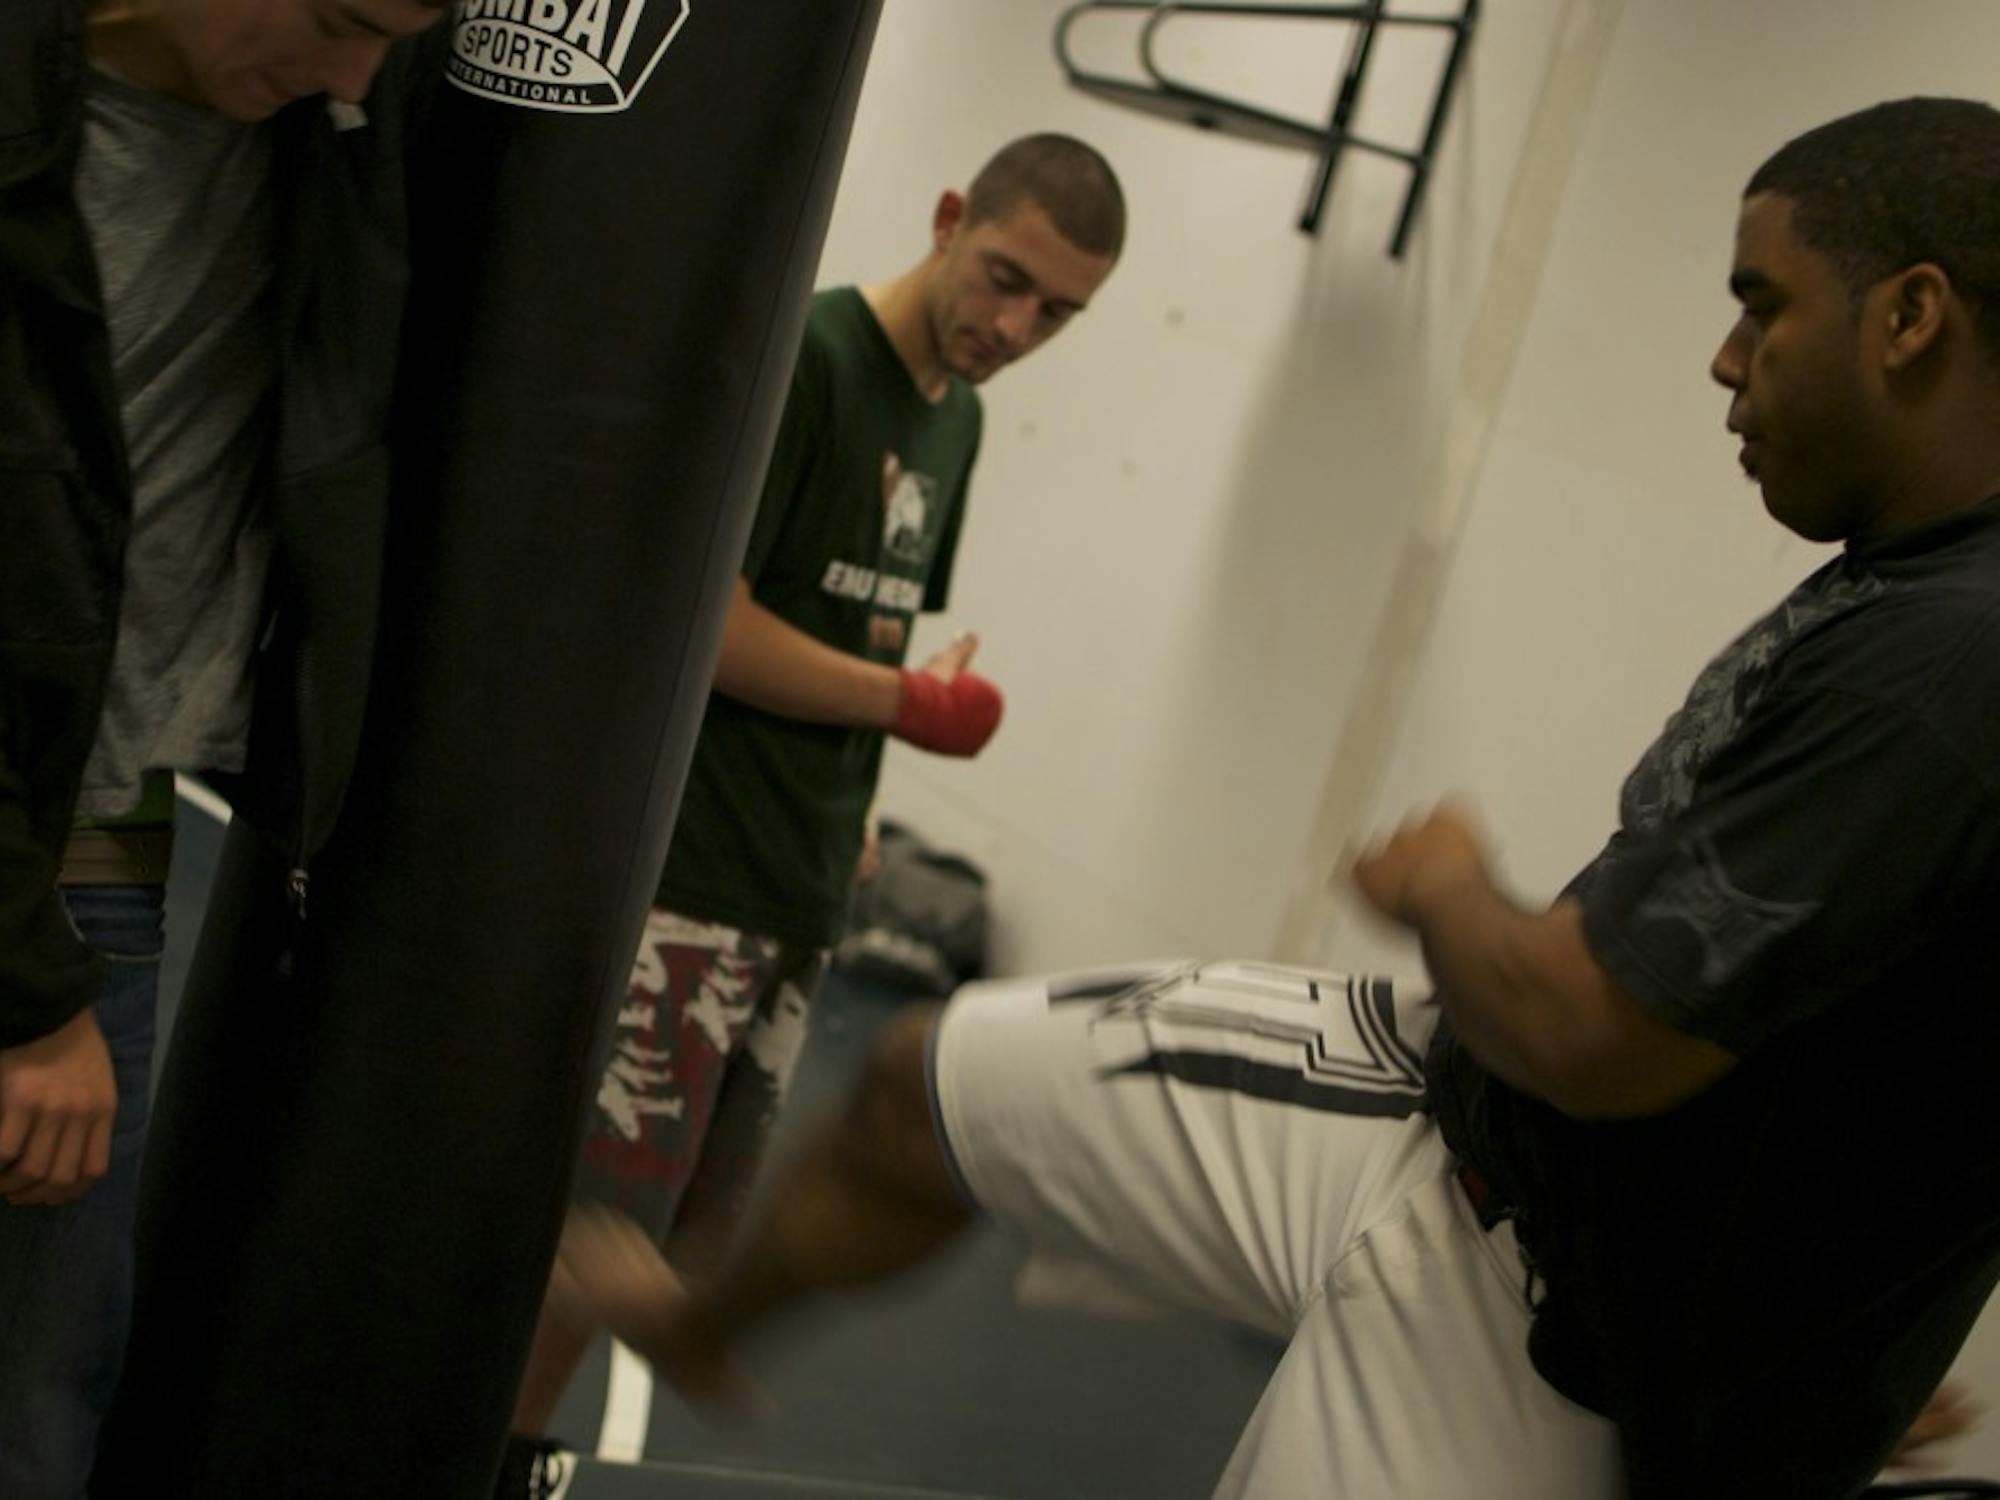 Eastern Michigan University students began the MMA student organization in 2006, after being a part of Detroit MMA for a year prior. 